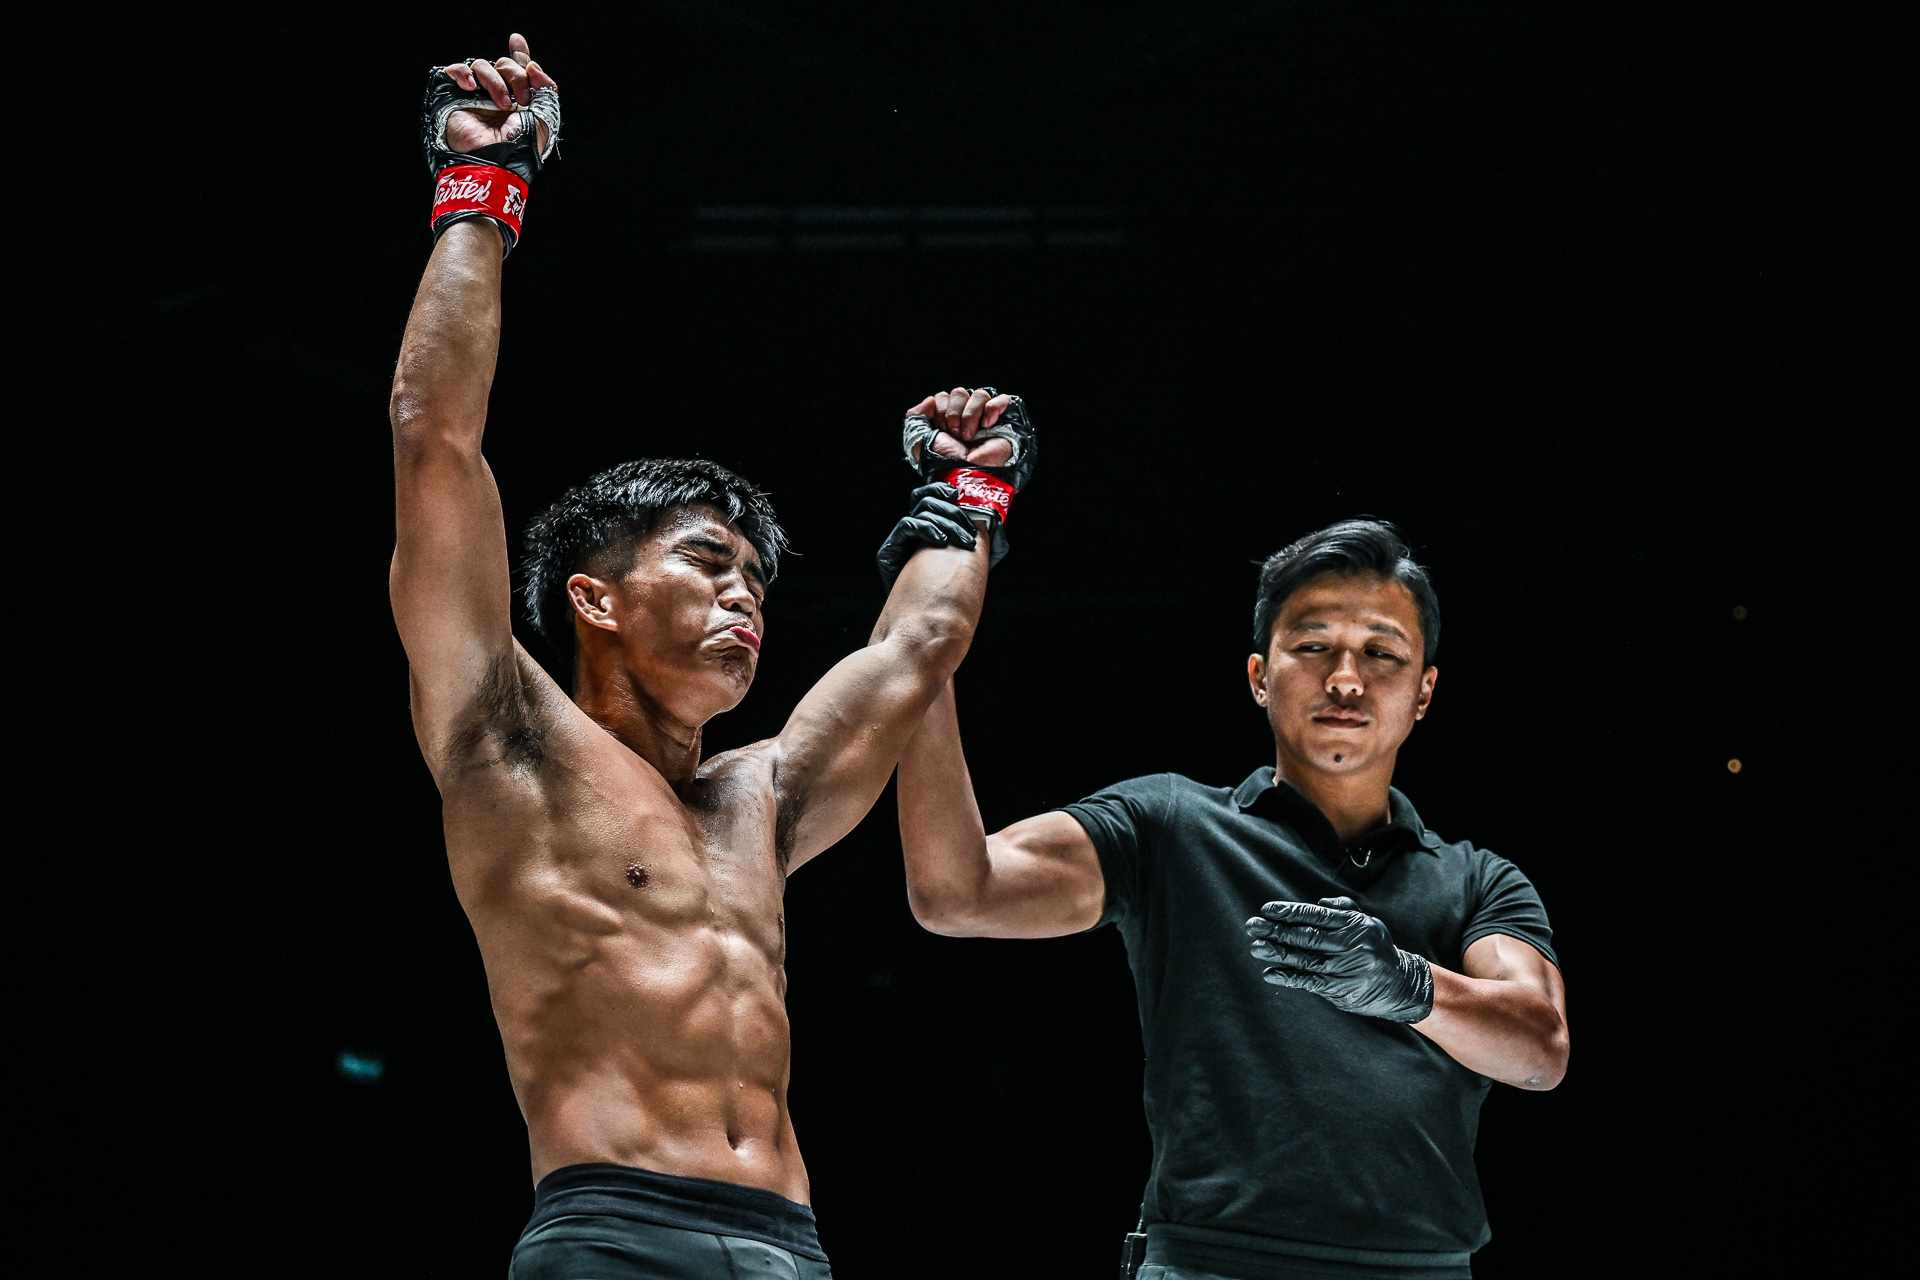 ONE-Friday-Fights-38-Fritz-Biagtan-def-Deepak-Bhardwaj Fritz Biagtan aims to land $100k contract at ONE Friday Fights 44 Mixed Martial Arts News ONE Championship  - philippine sports news